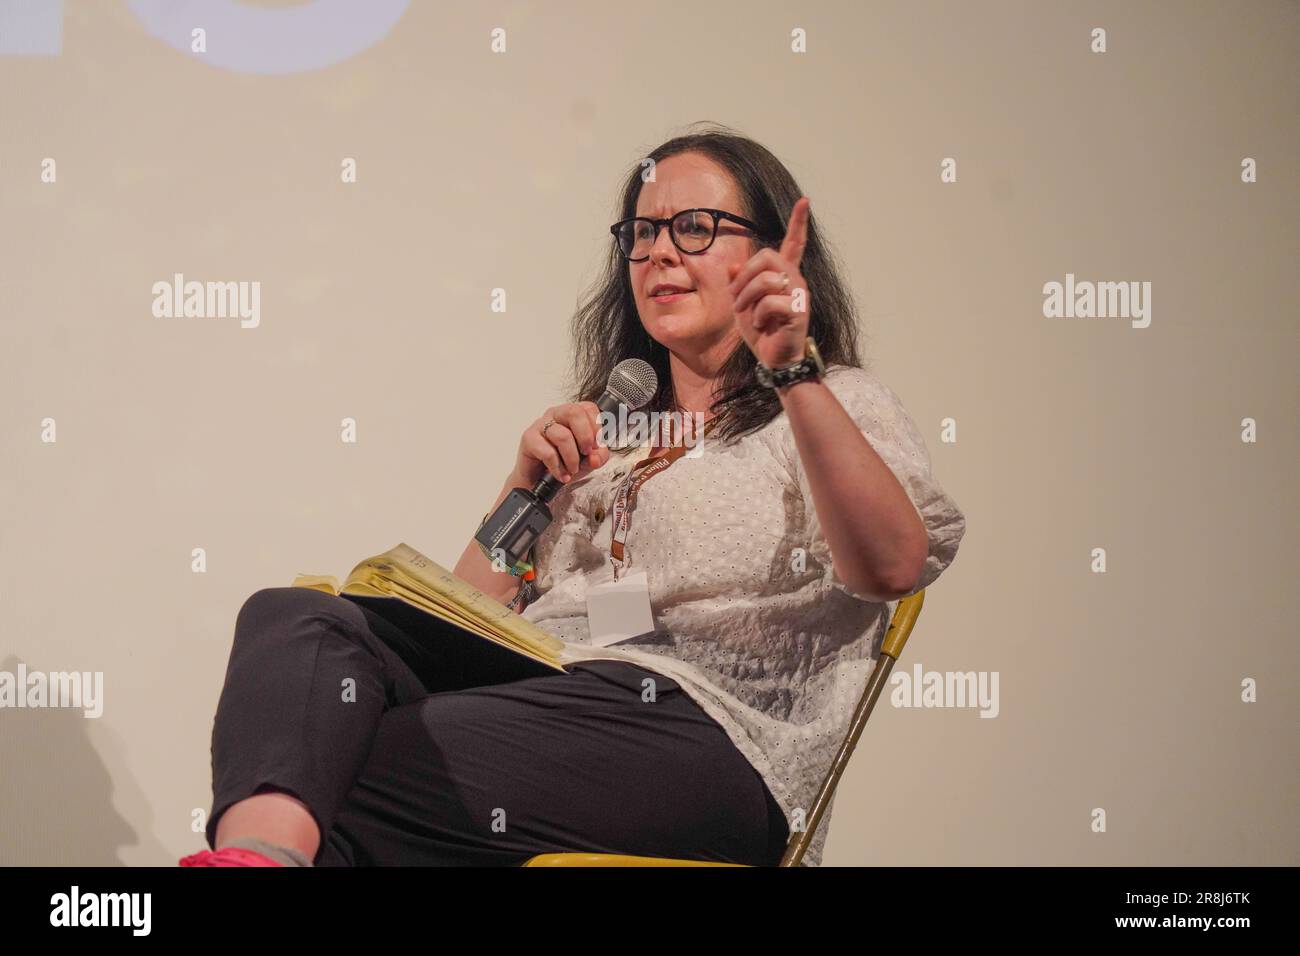 Helen O’Hara chairs a Q&A after a screening of Polite Society directed by Nida Manzor at the 2023 Glastonbury festival. Wednesday, 21 June, 2023. Views of the 2023 Glastonbury Festival. Photo: Richard Gray/Alamy Live News Stock Photo